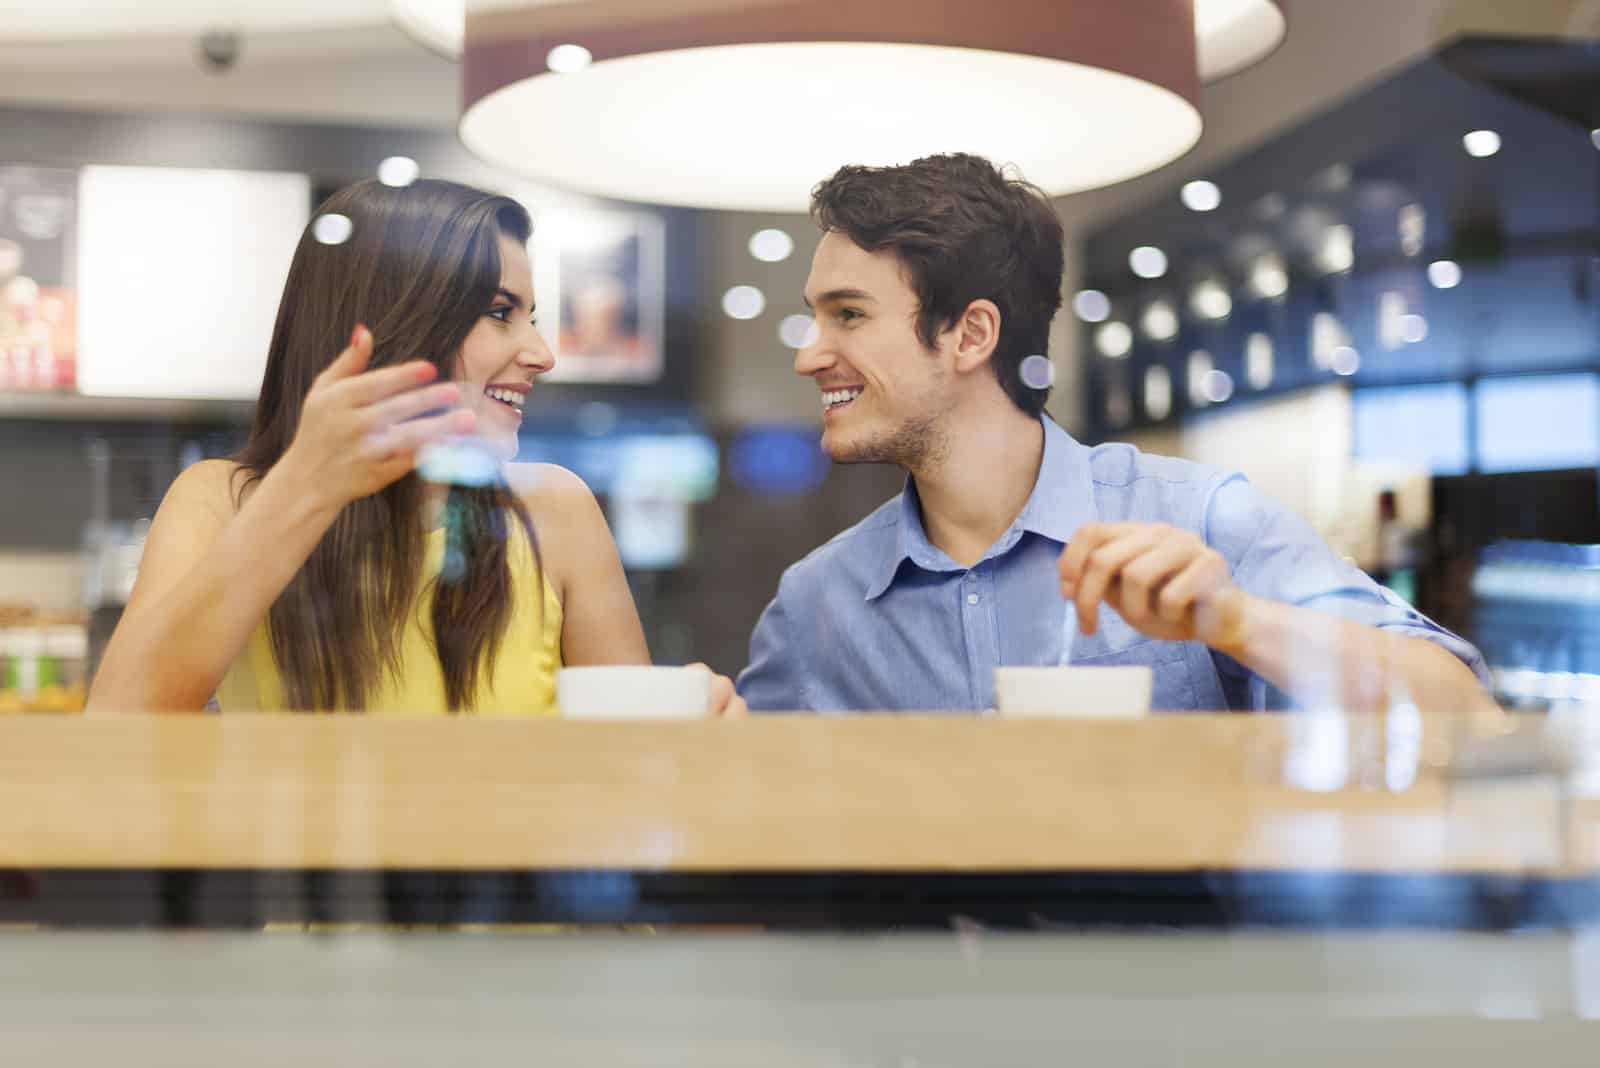 a smiling man and woman sit at a table and talk